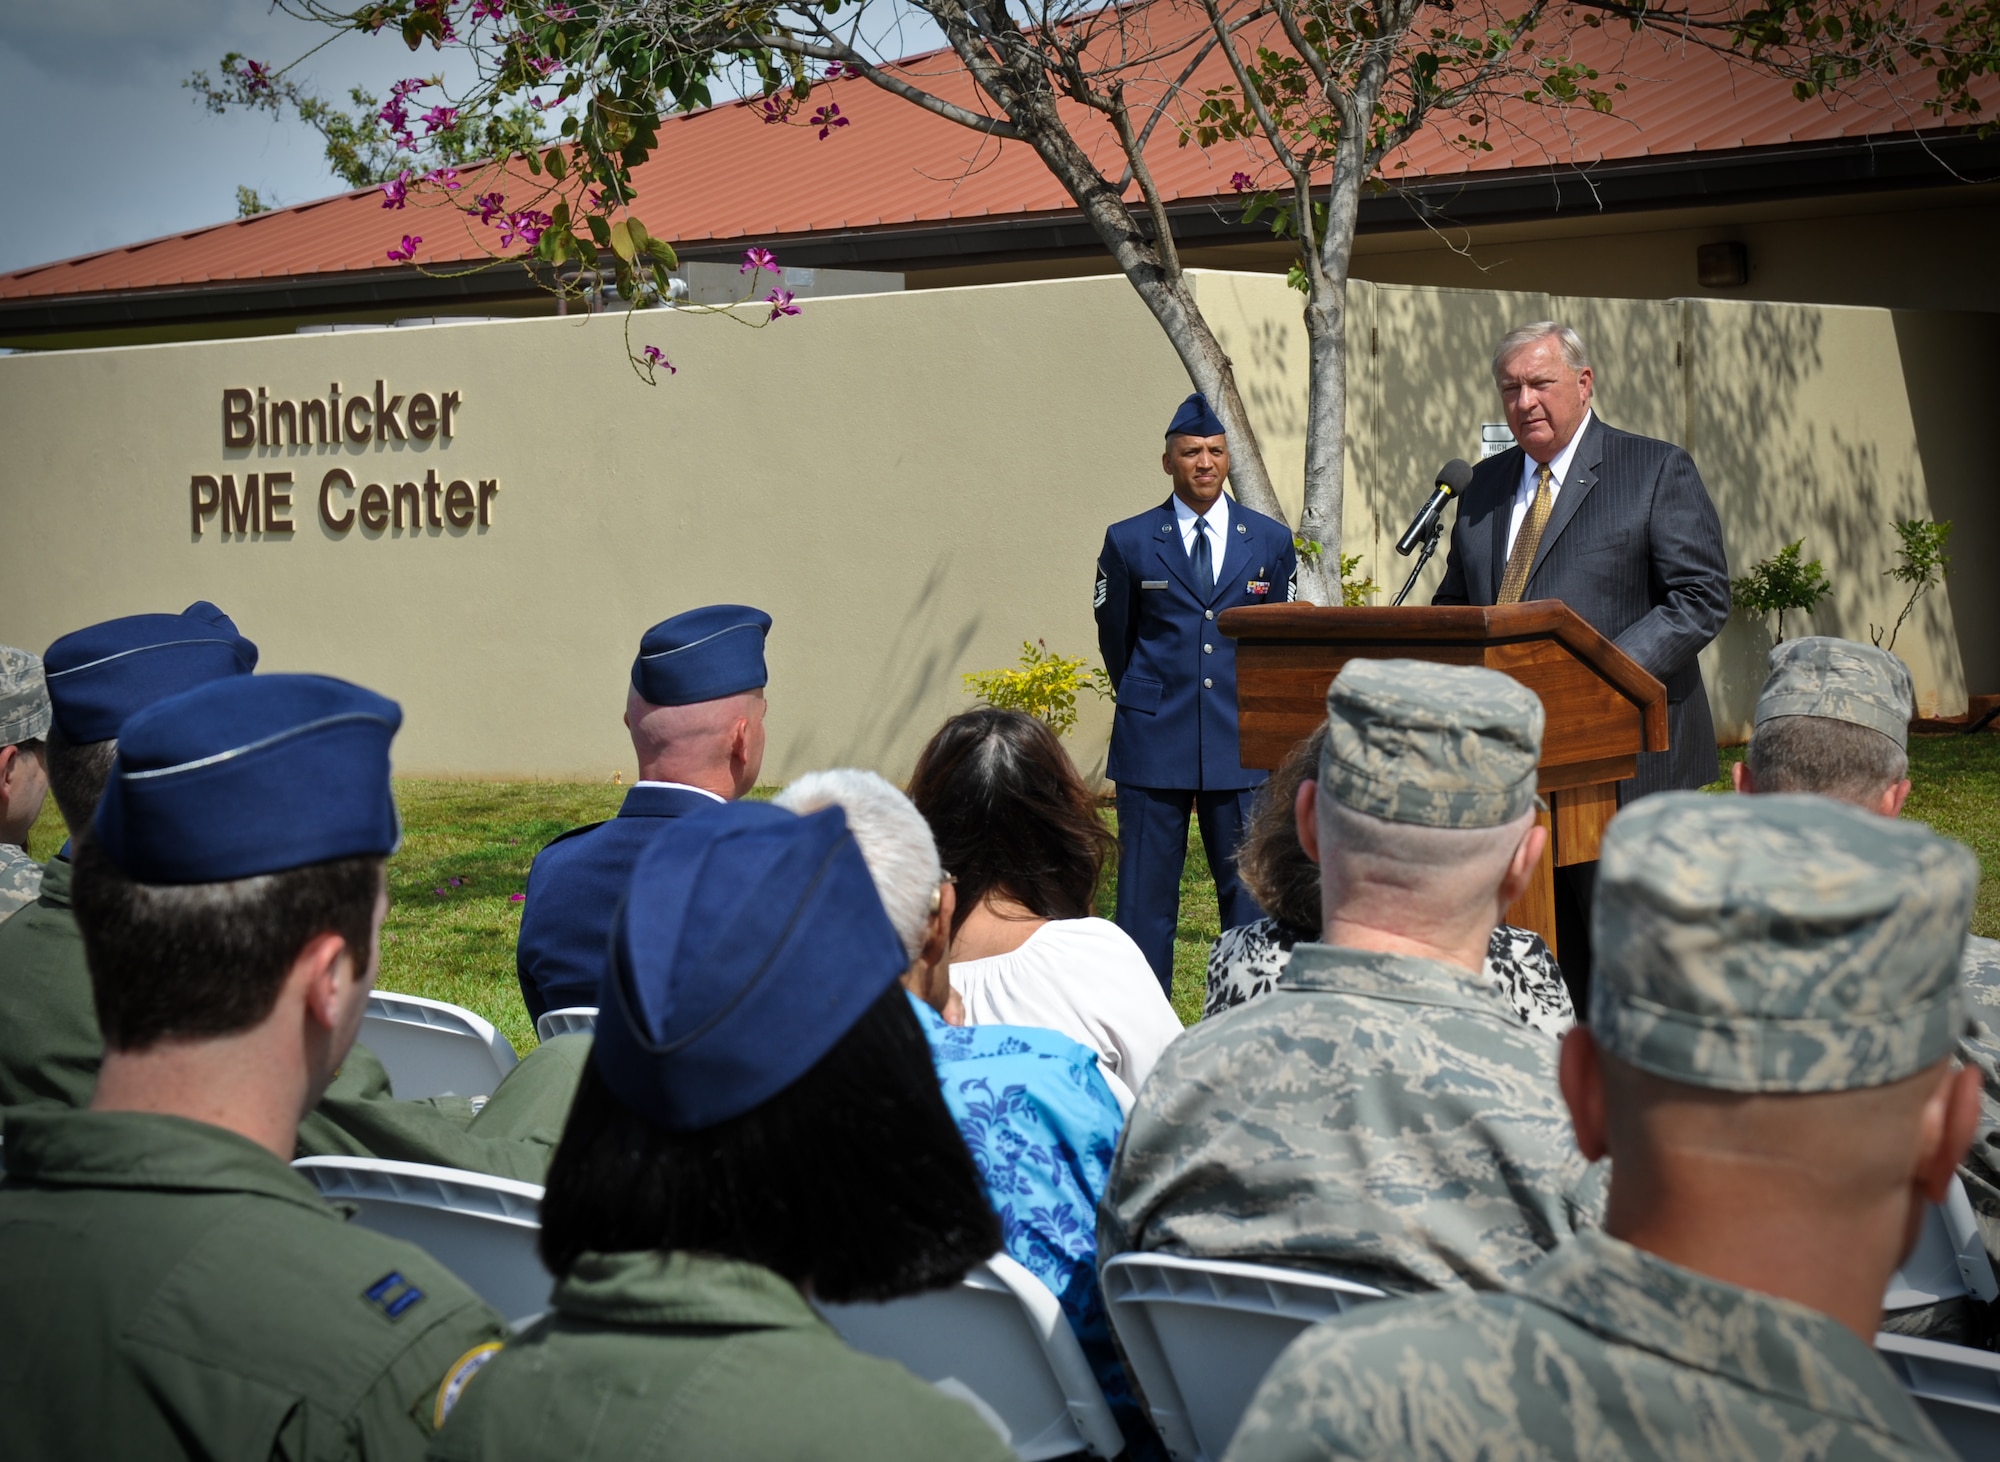 James Binnicker, the 9th Chief Master Sgt. of the Air Force speaks to members of Joint Base Pearl Harbor-Hickam, Hawaii Feb. 15 at a commemorative ceremony honoring Binnicker by renaming the Professional Military Education center here in his honor. Binnicker is credited with revising and improving Air Force PME during his tenure as CMSAF. (U.S. Air Force photo/Senior Airman Lauren Main)